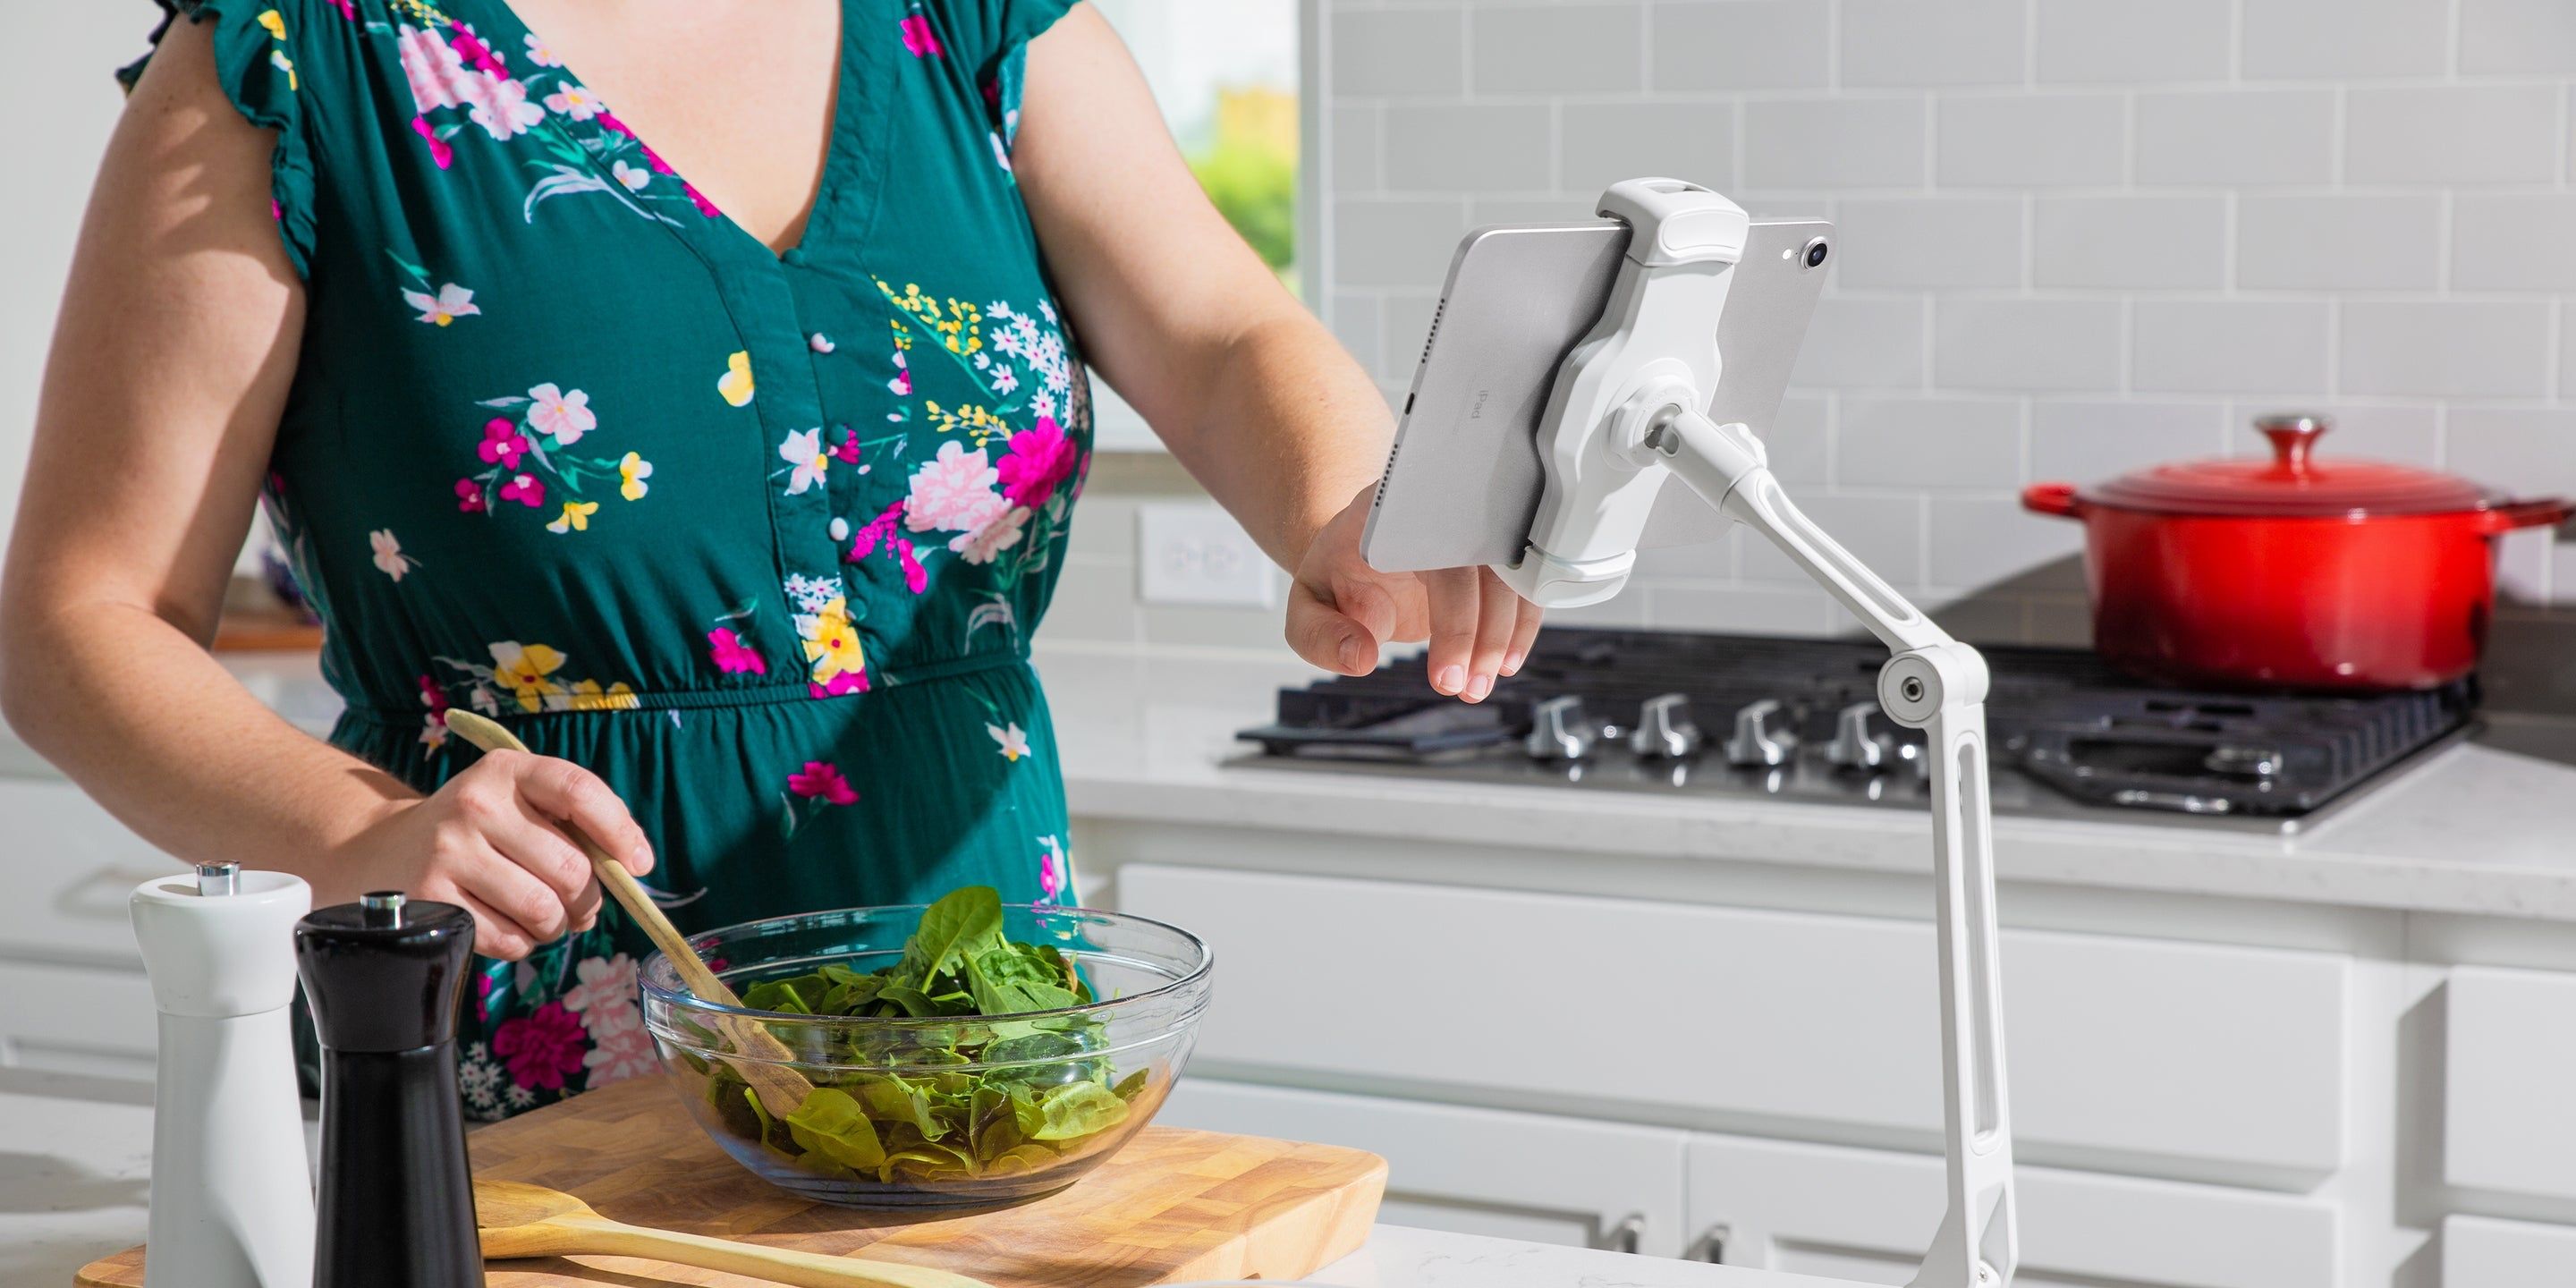 Woman using her iPad in the kitchen with Twelve South's HoverBar Duo stand